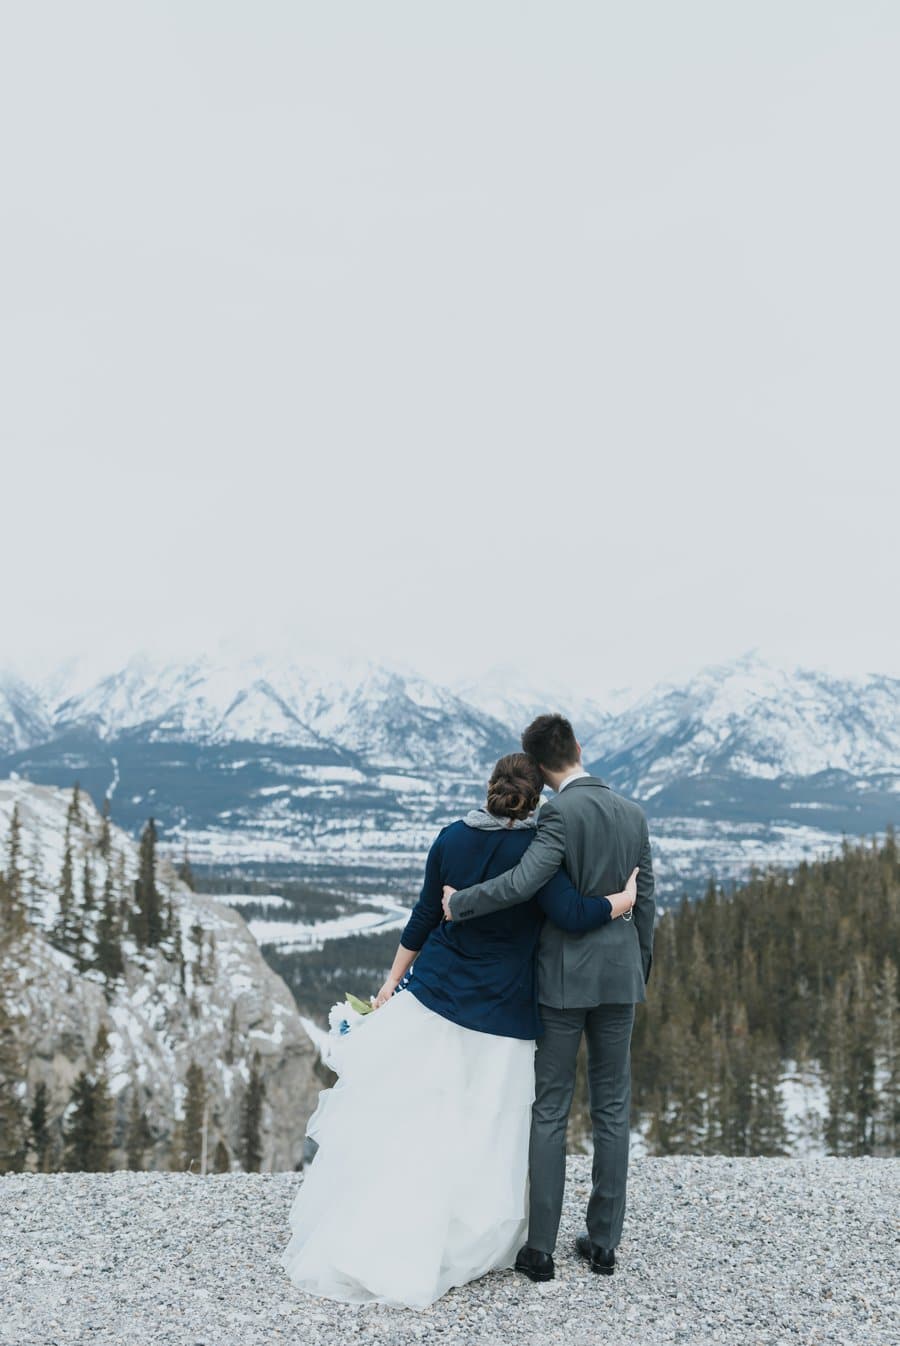 Canmore wedding photographers portraits mountains winter 